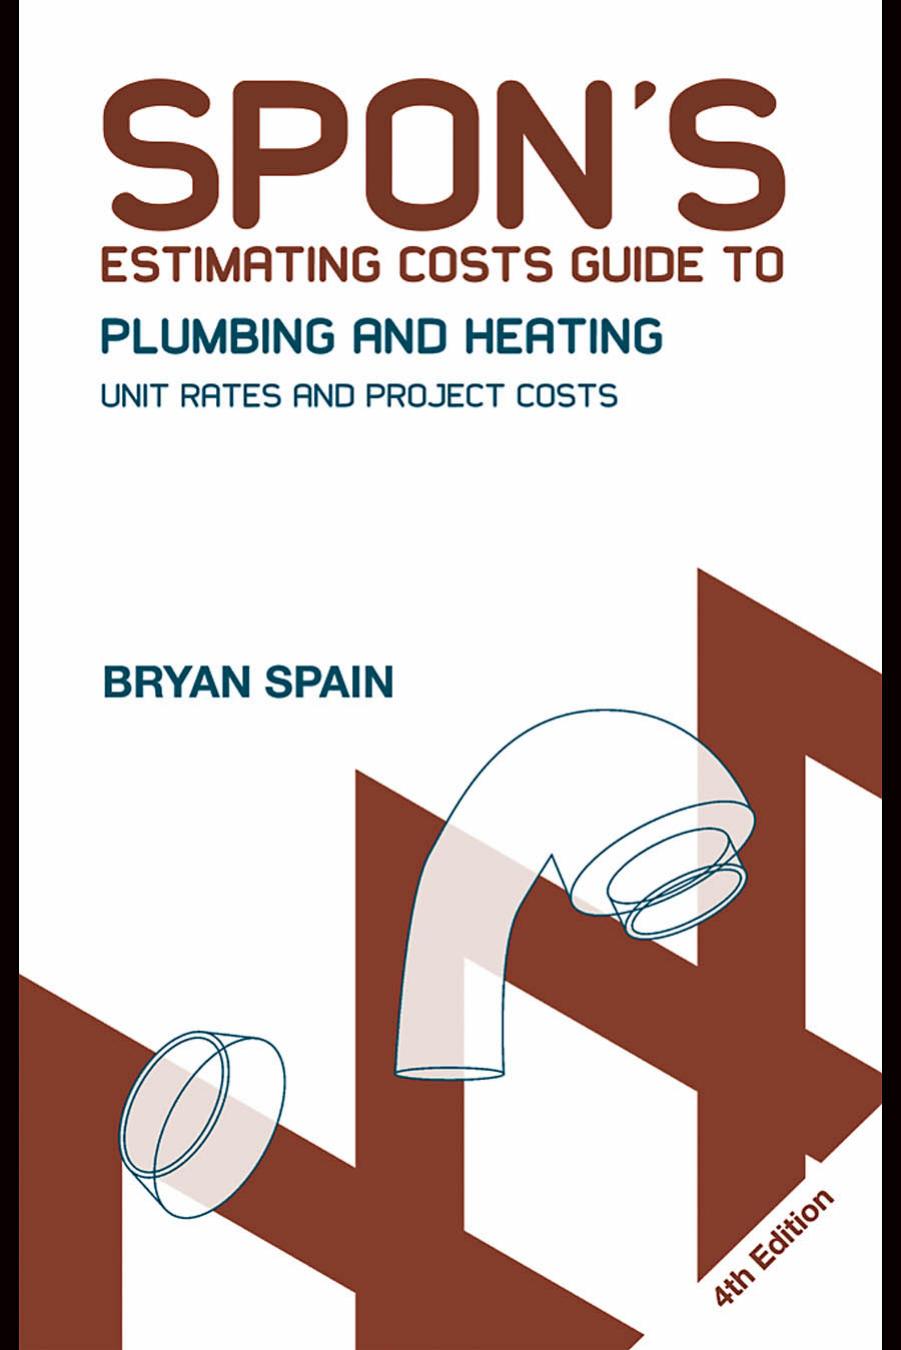 Spon’s Estimating Costs Guide to Plumbing and Heating: Unit rates and project costs, Fourth edition